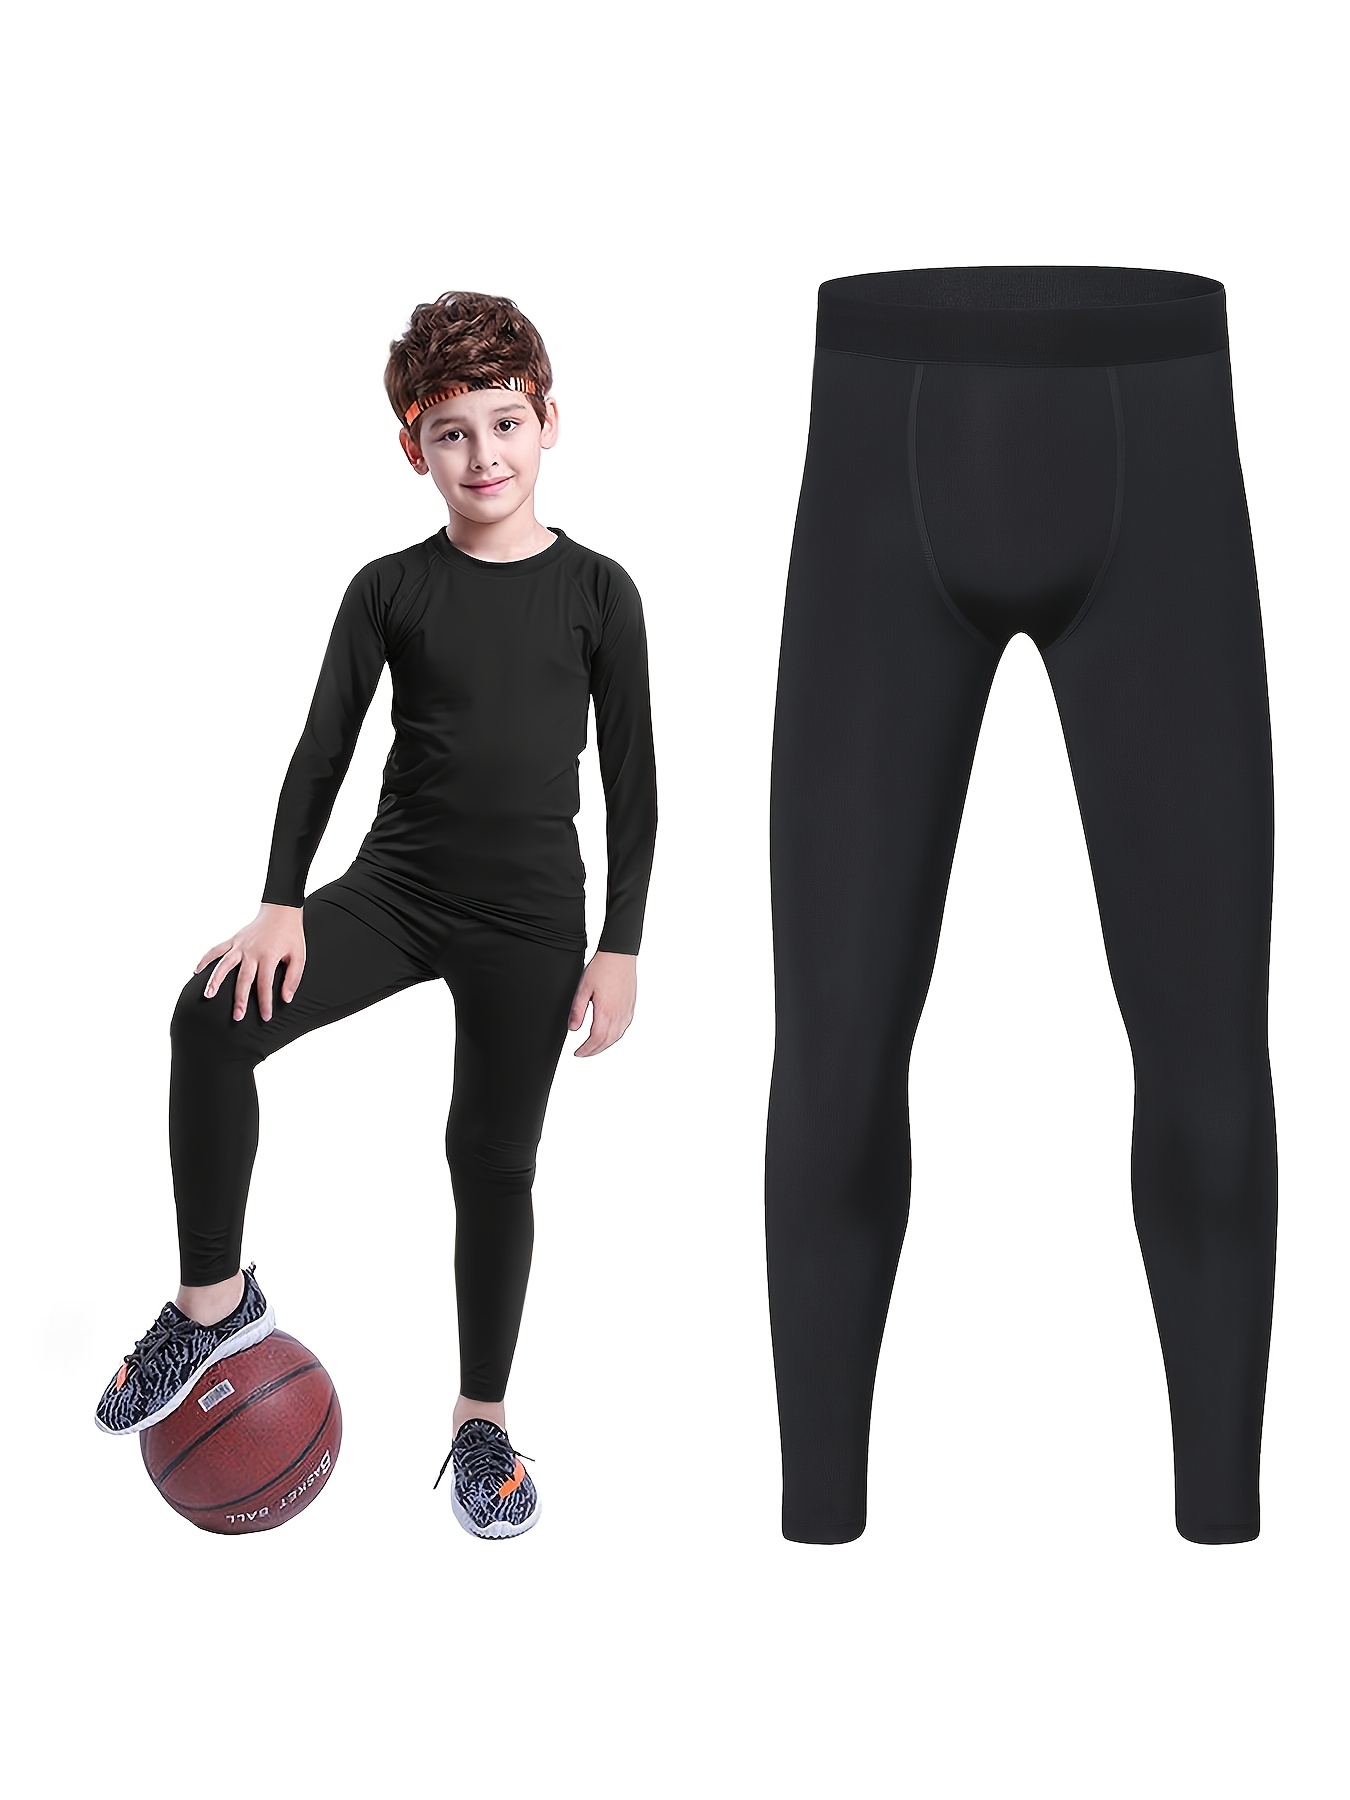 TELALEO 3/4 Boys Youth Compression Leggings Tights Base Layer Sports  Running Capris Kids for Workout Training